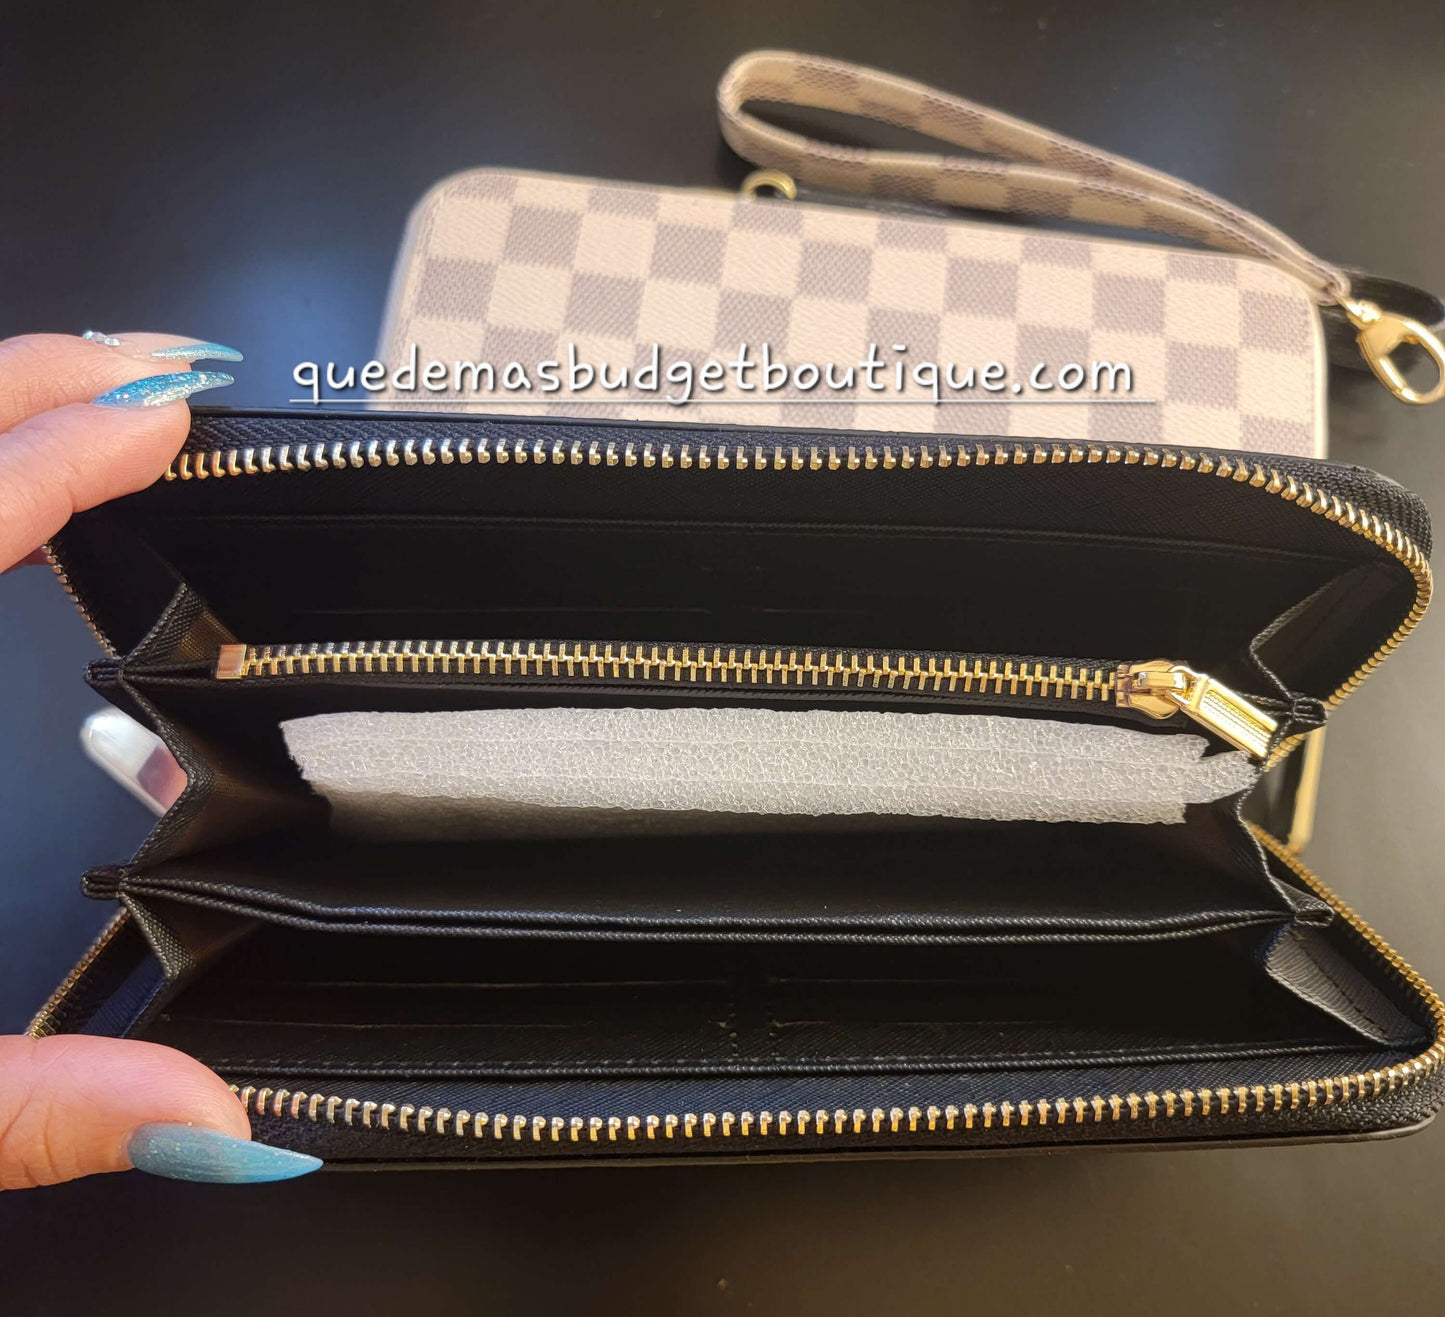 Checkered Wallet & Wristlet!!! 2 Options Available!